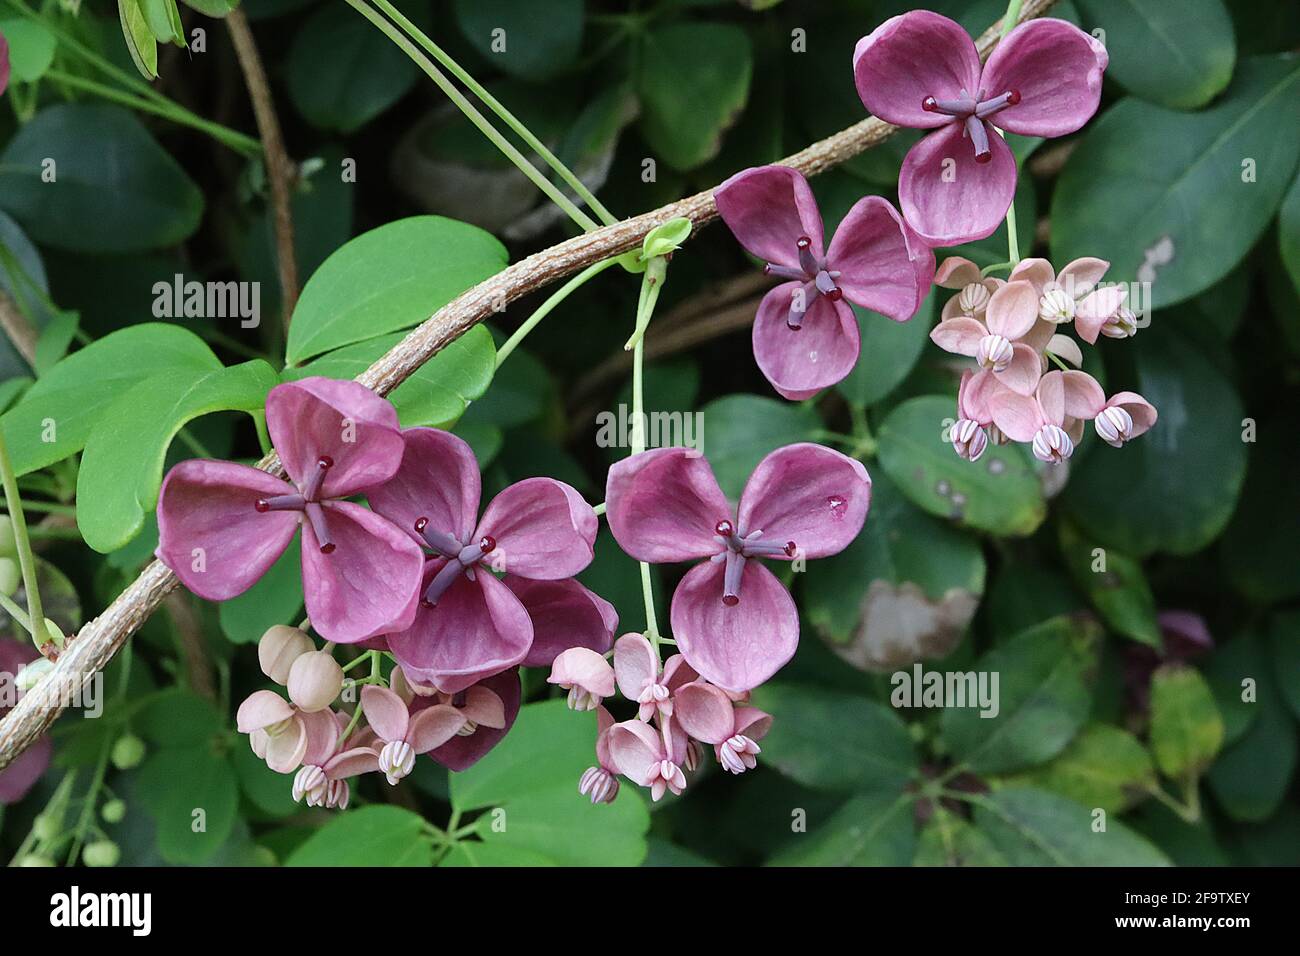 Akebia quinata Chocolate vine – scented purple cup-shaped flowers with thick sepals,  April, England, UK Stock Photo